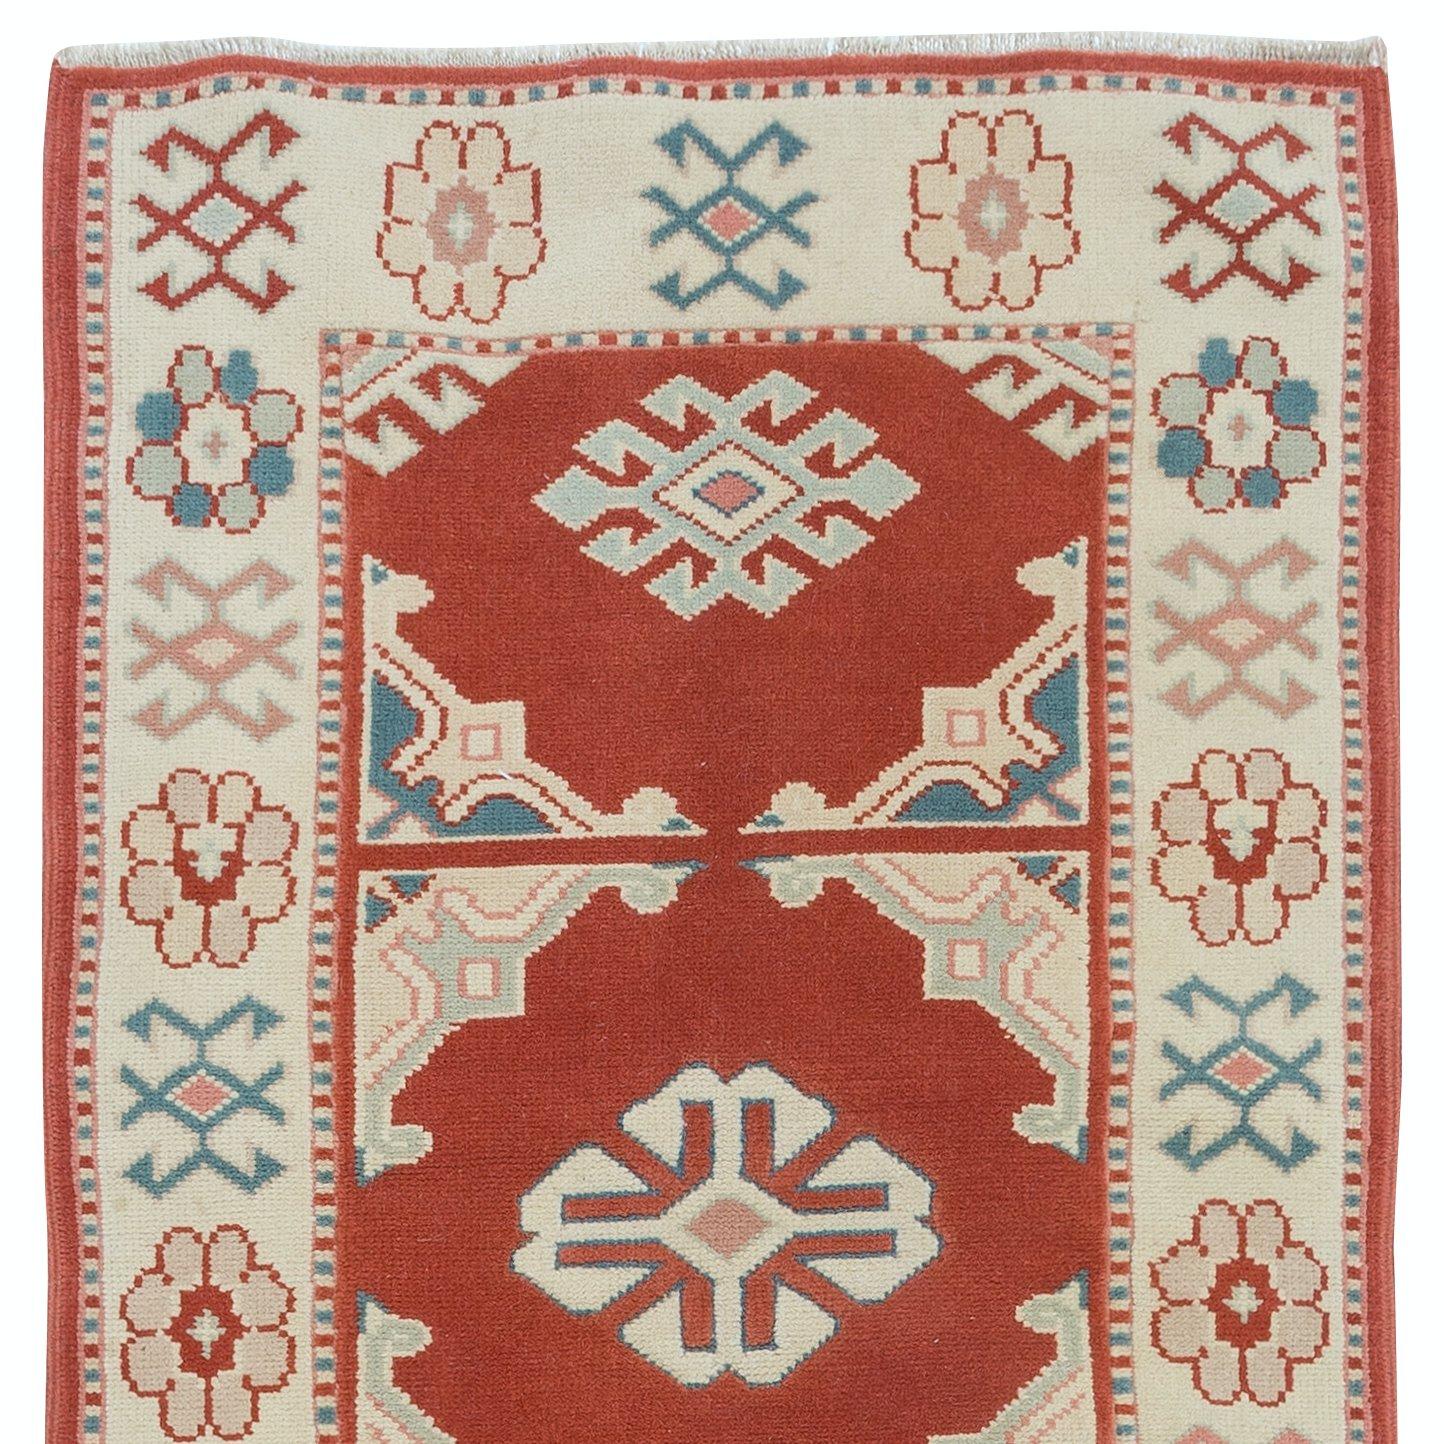 Hand-Knotted 2.5x7.3 Ft One of a Kind Turkish Rug in Red & Beige, Hallway Runner, 100% Wool For Sale